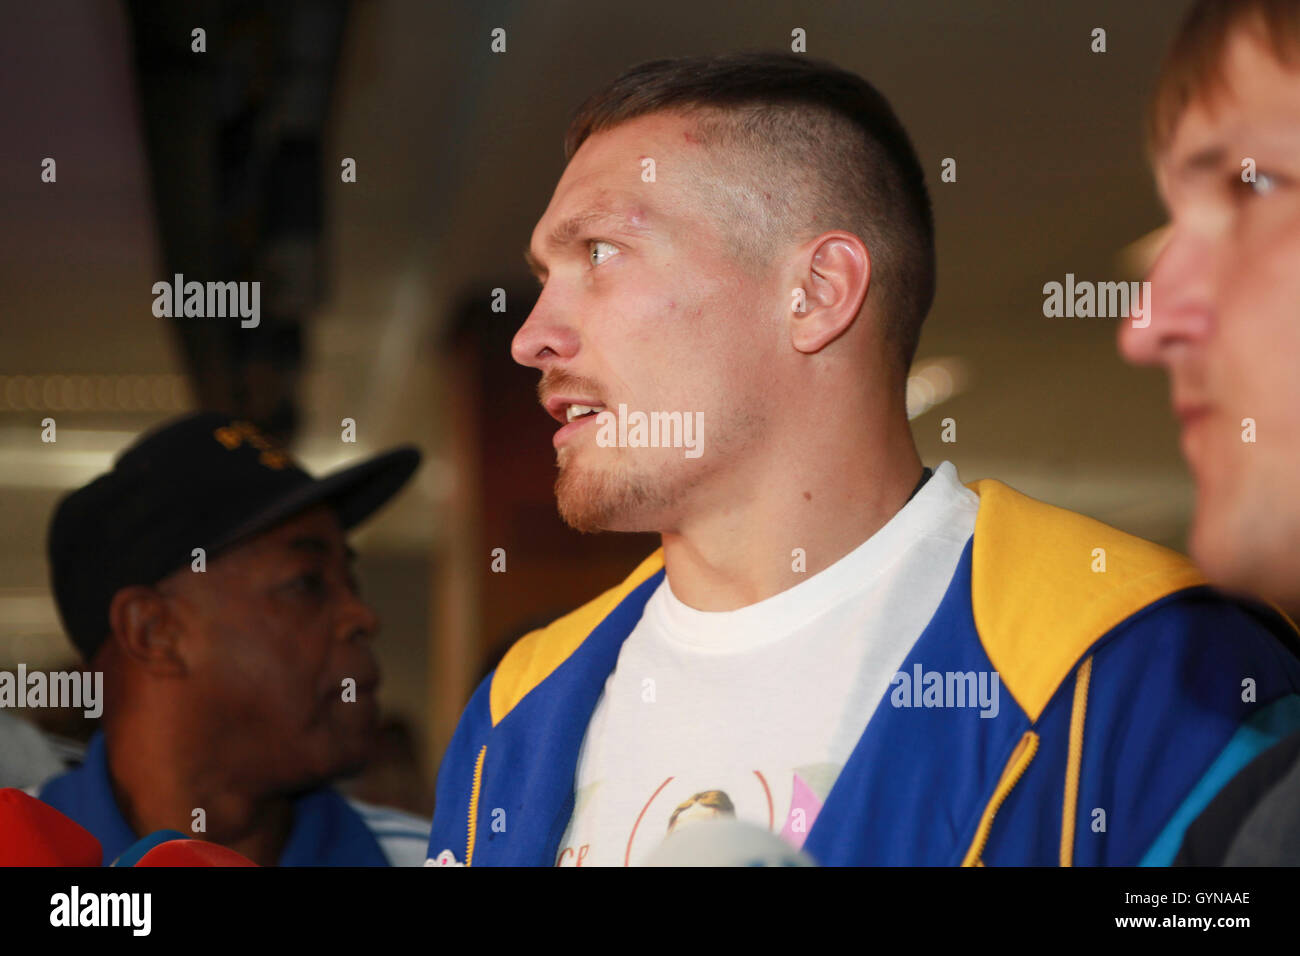 Kiev, Ukraine. 18th Sep, 2016. On 18 September 2016 Ukraine's new WBO Cruiserweight World Champion Alexander Usyk arrived to Kiev from Warsaw after winning against Krzysztof Glowacki in Gdansk on 17 September. Usyk was met like a national hero, with his coach American James Ali Bashir. Usyk stated he would like to start Cruiserweight belts unification from fighting WBC champion Briton Tony Bellew. Stock Photo